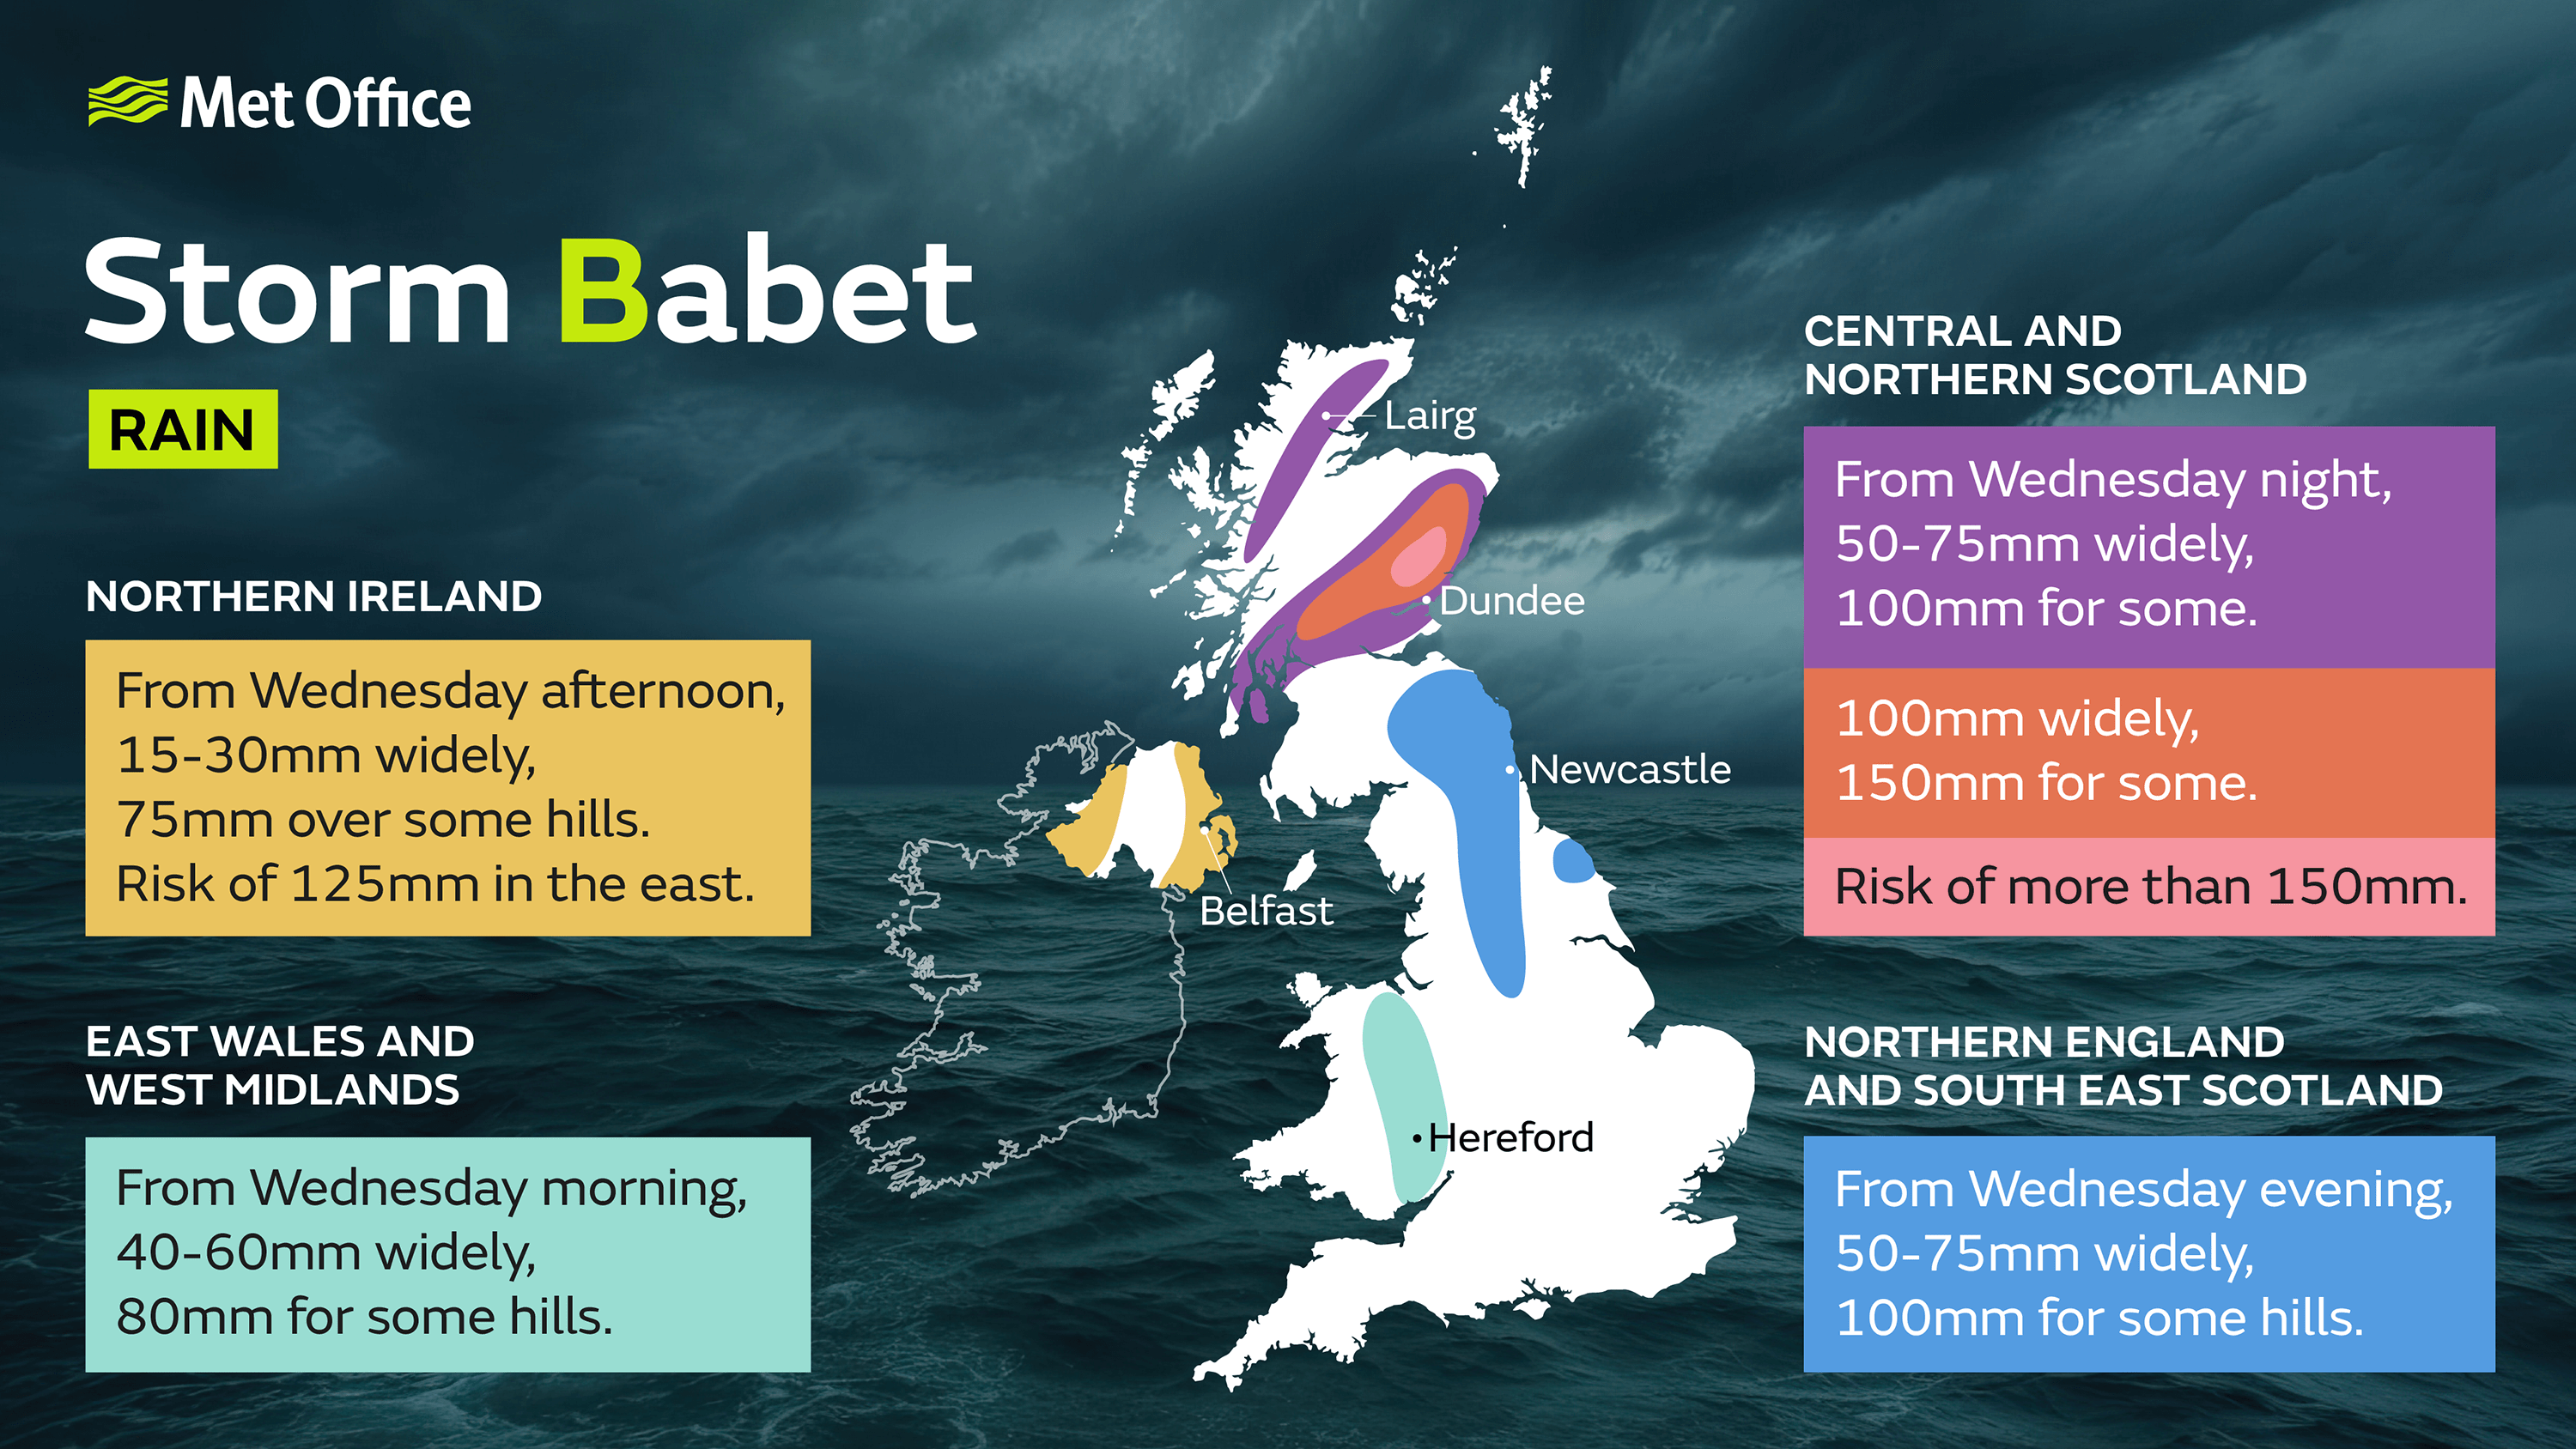 Storm Babet - Rain. Northern Ireland - From Wednesday afternoon, 15-30mm widely, 75mm over some hills. Risk of 125mm in the east. East Wales and West Midlands: From Wednesday morning, 40-60mm widely, 80mm for some hills. Central and northern Scotland: From Wednesday night, 50-75mm widely, 100mm for some. More focused on E Scotland, 100mm widely, 150mm for some. A smaller point in the northeast of Scotland, risk of more than 150mm. Northern England and southeast Scotland: From Wednesday evening, 50-75mm widely, 100mm for some hills.